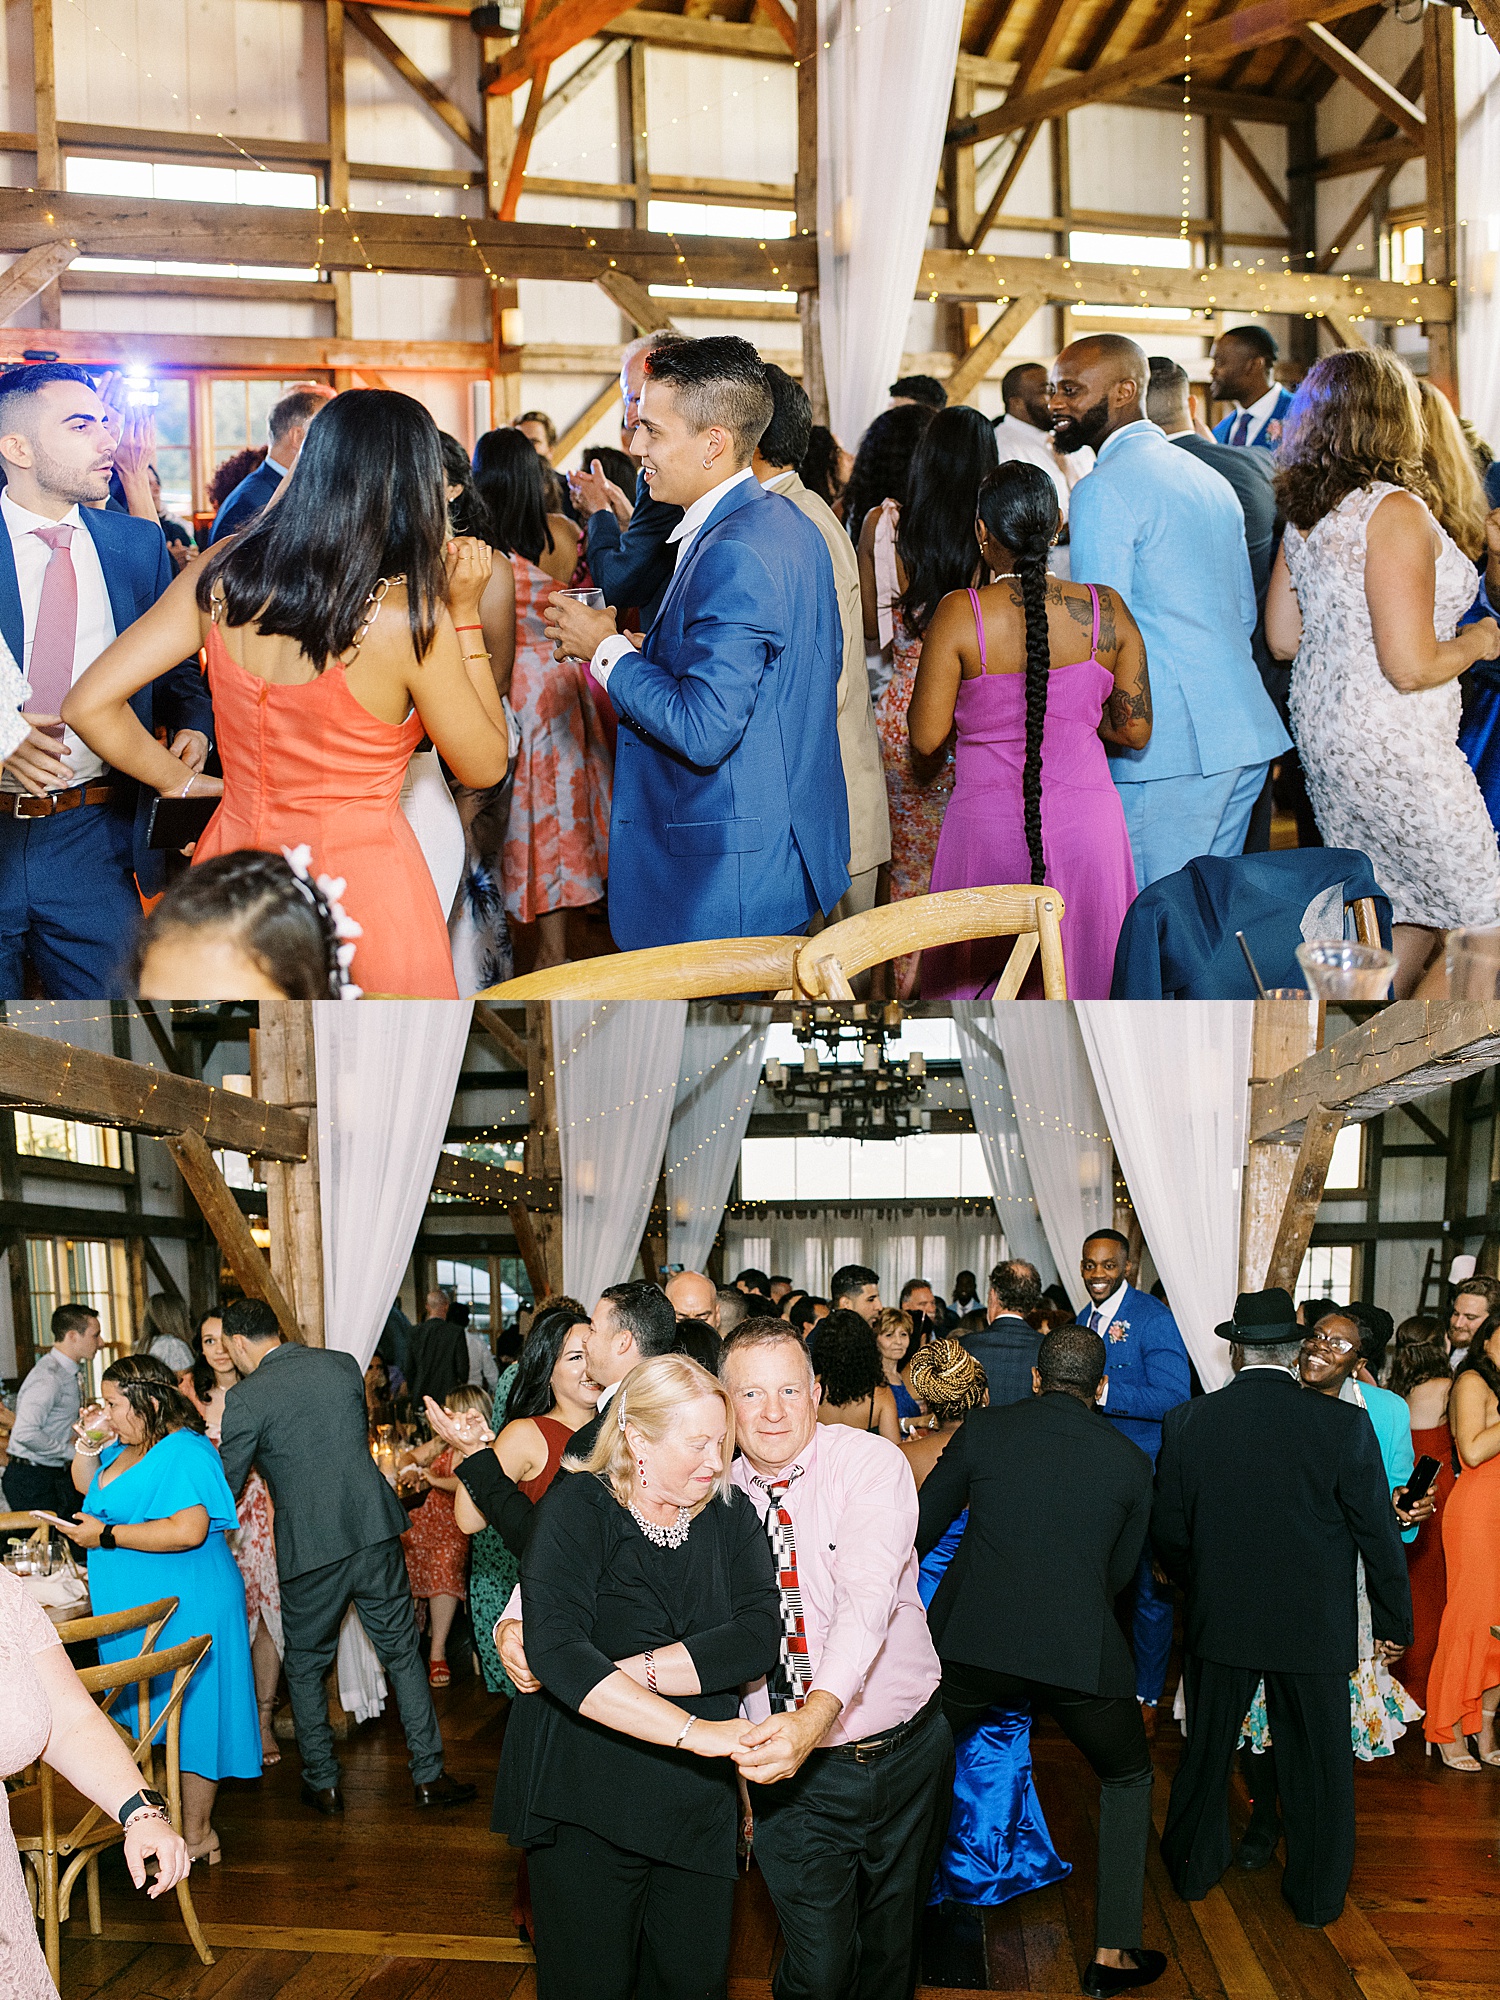 Guests dancing at rustic reception at for Valley View Farm wedding